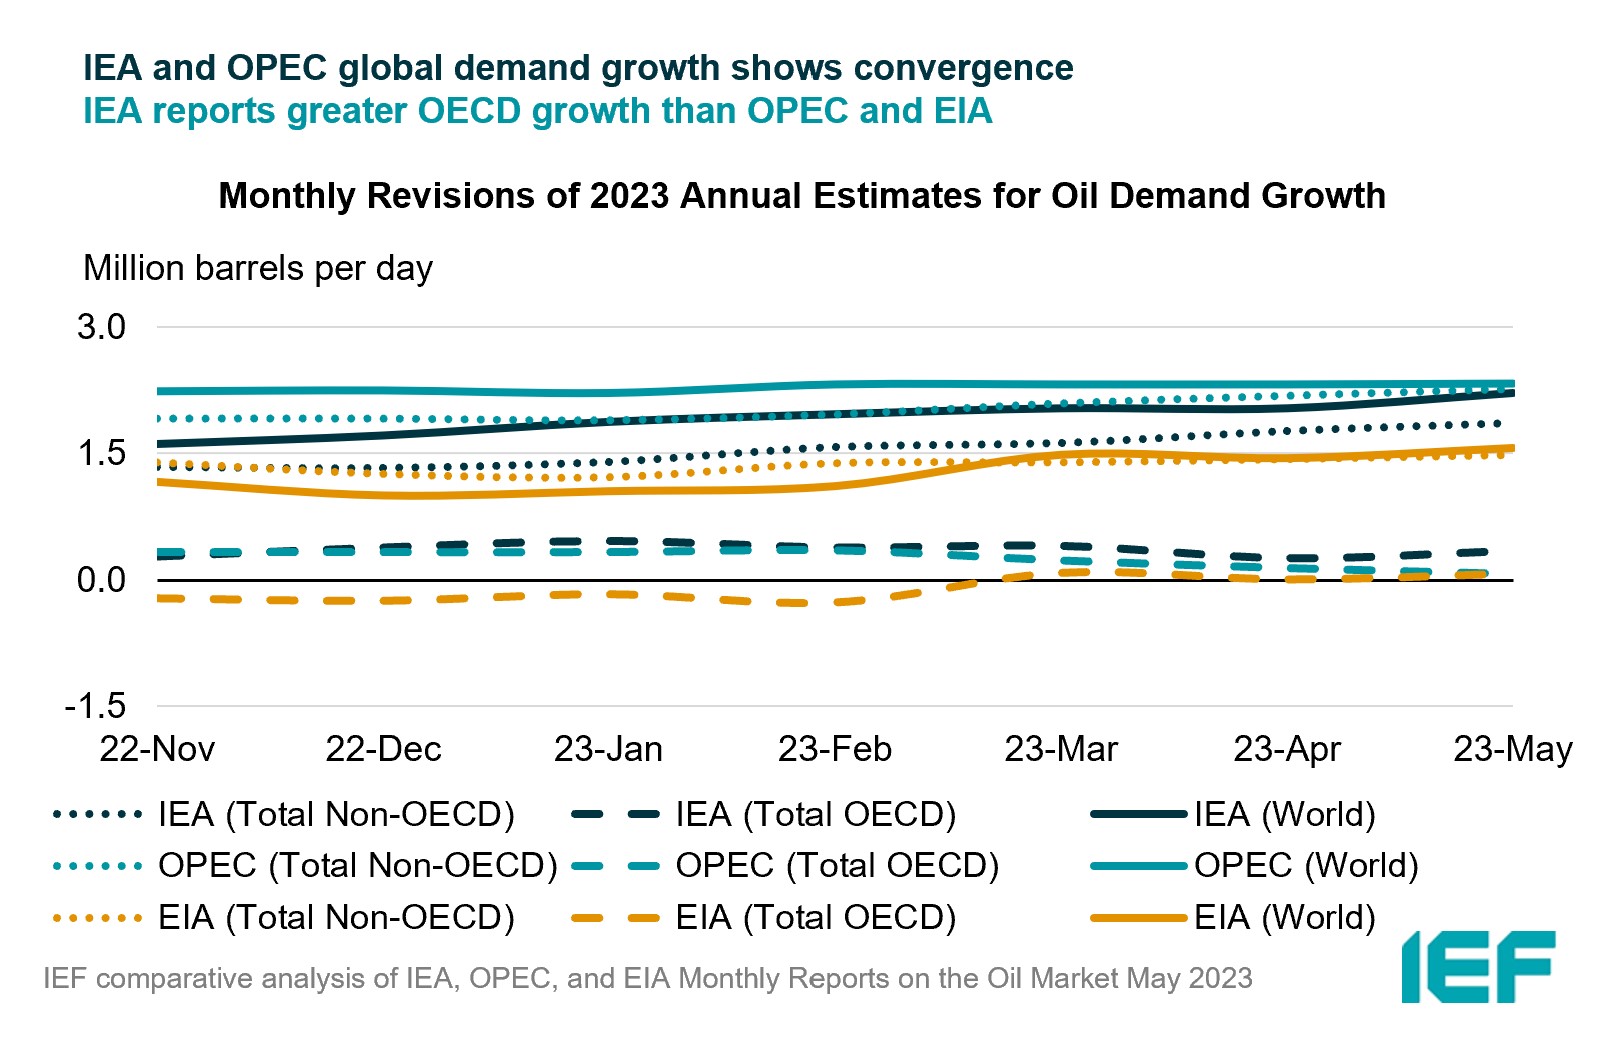 Chart: Monthly Revisions of Annual Estimates for Oil Demand Growth